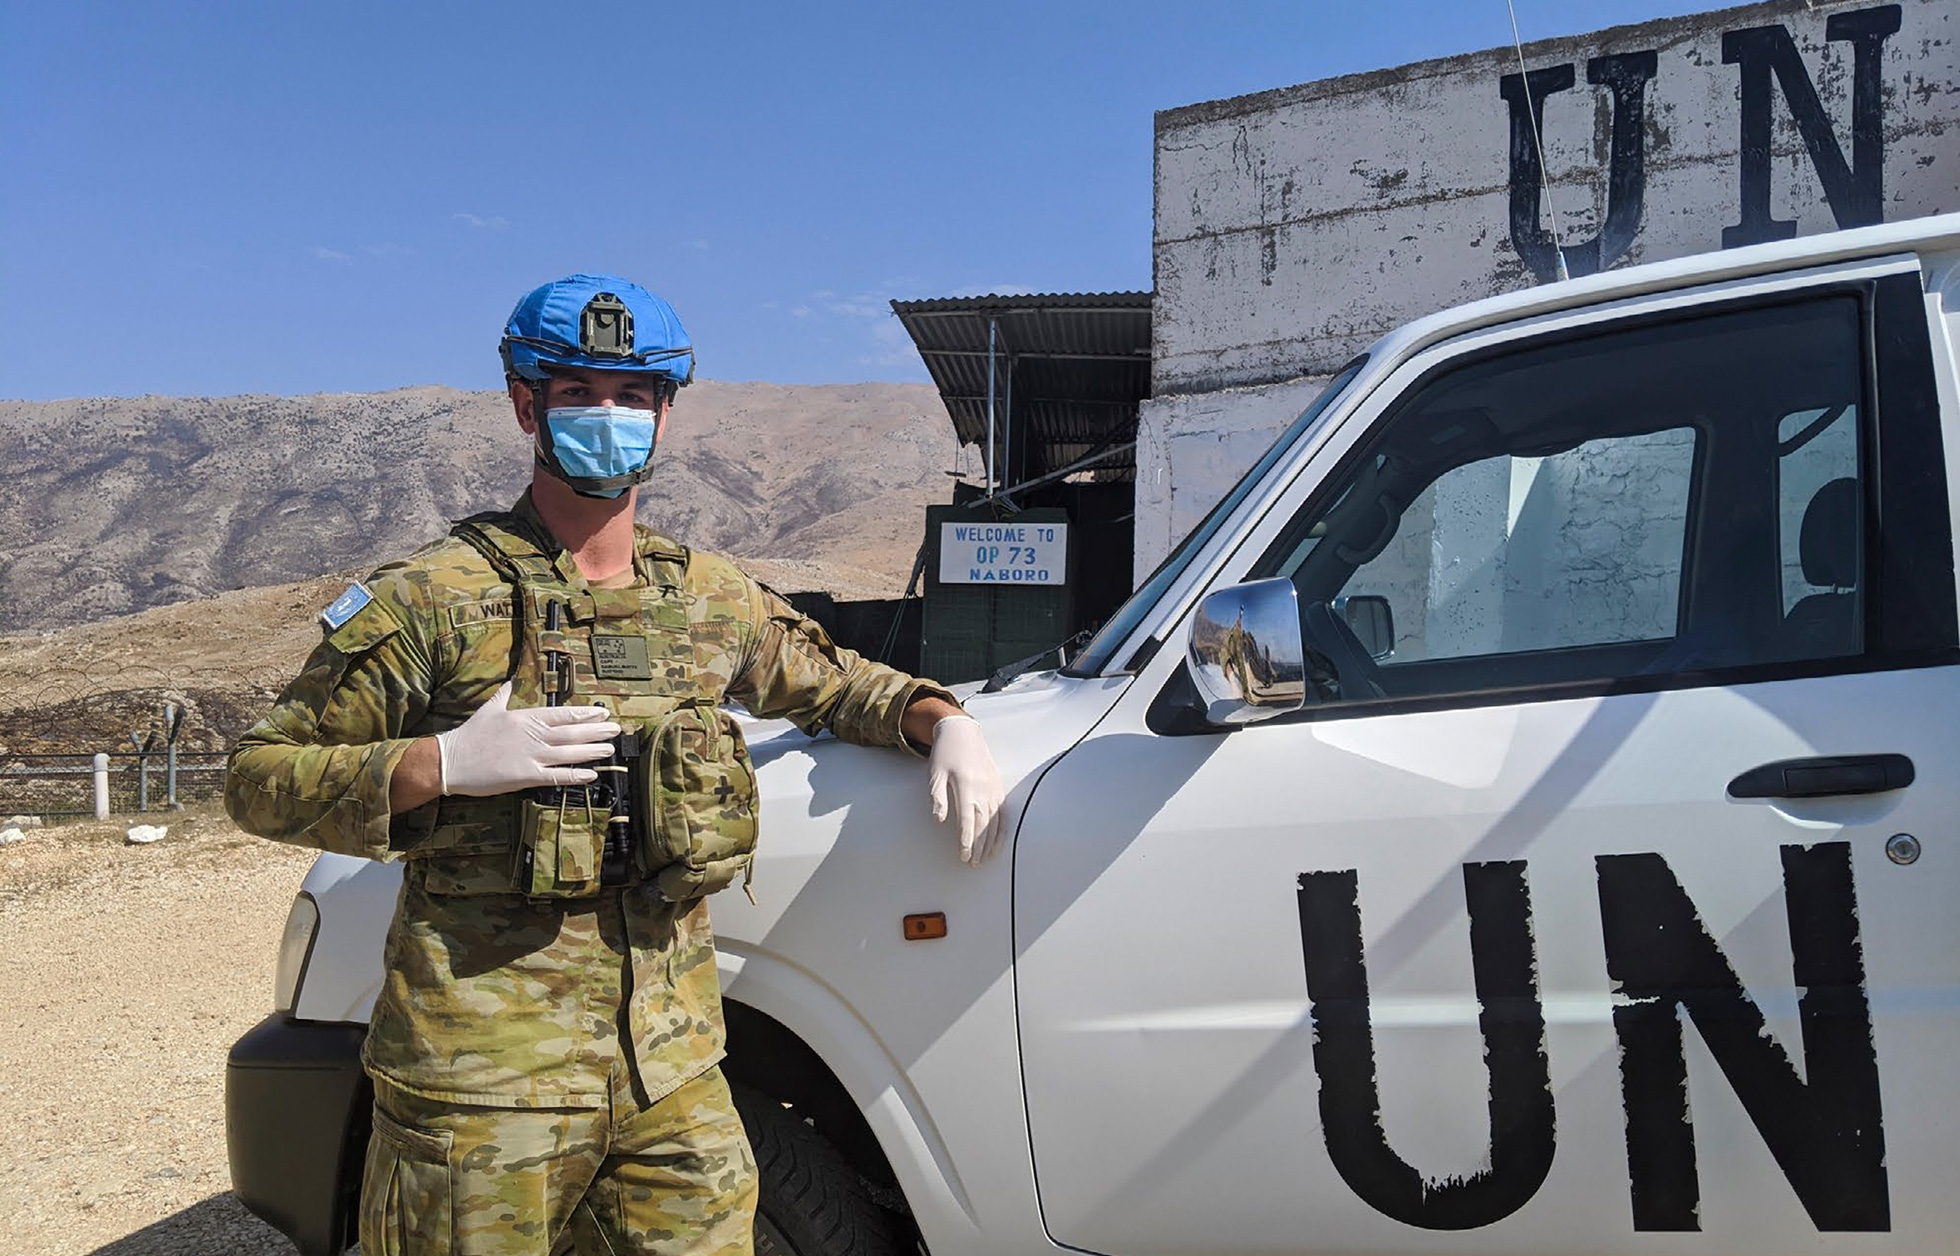 An Australian Army Officer on a peacekeeping mission in Lebanon, 2020. UN peacekeeping personnel are identified by their pale blue berets. Source: Defence Images